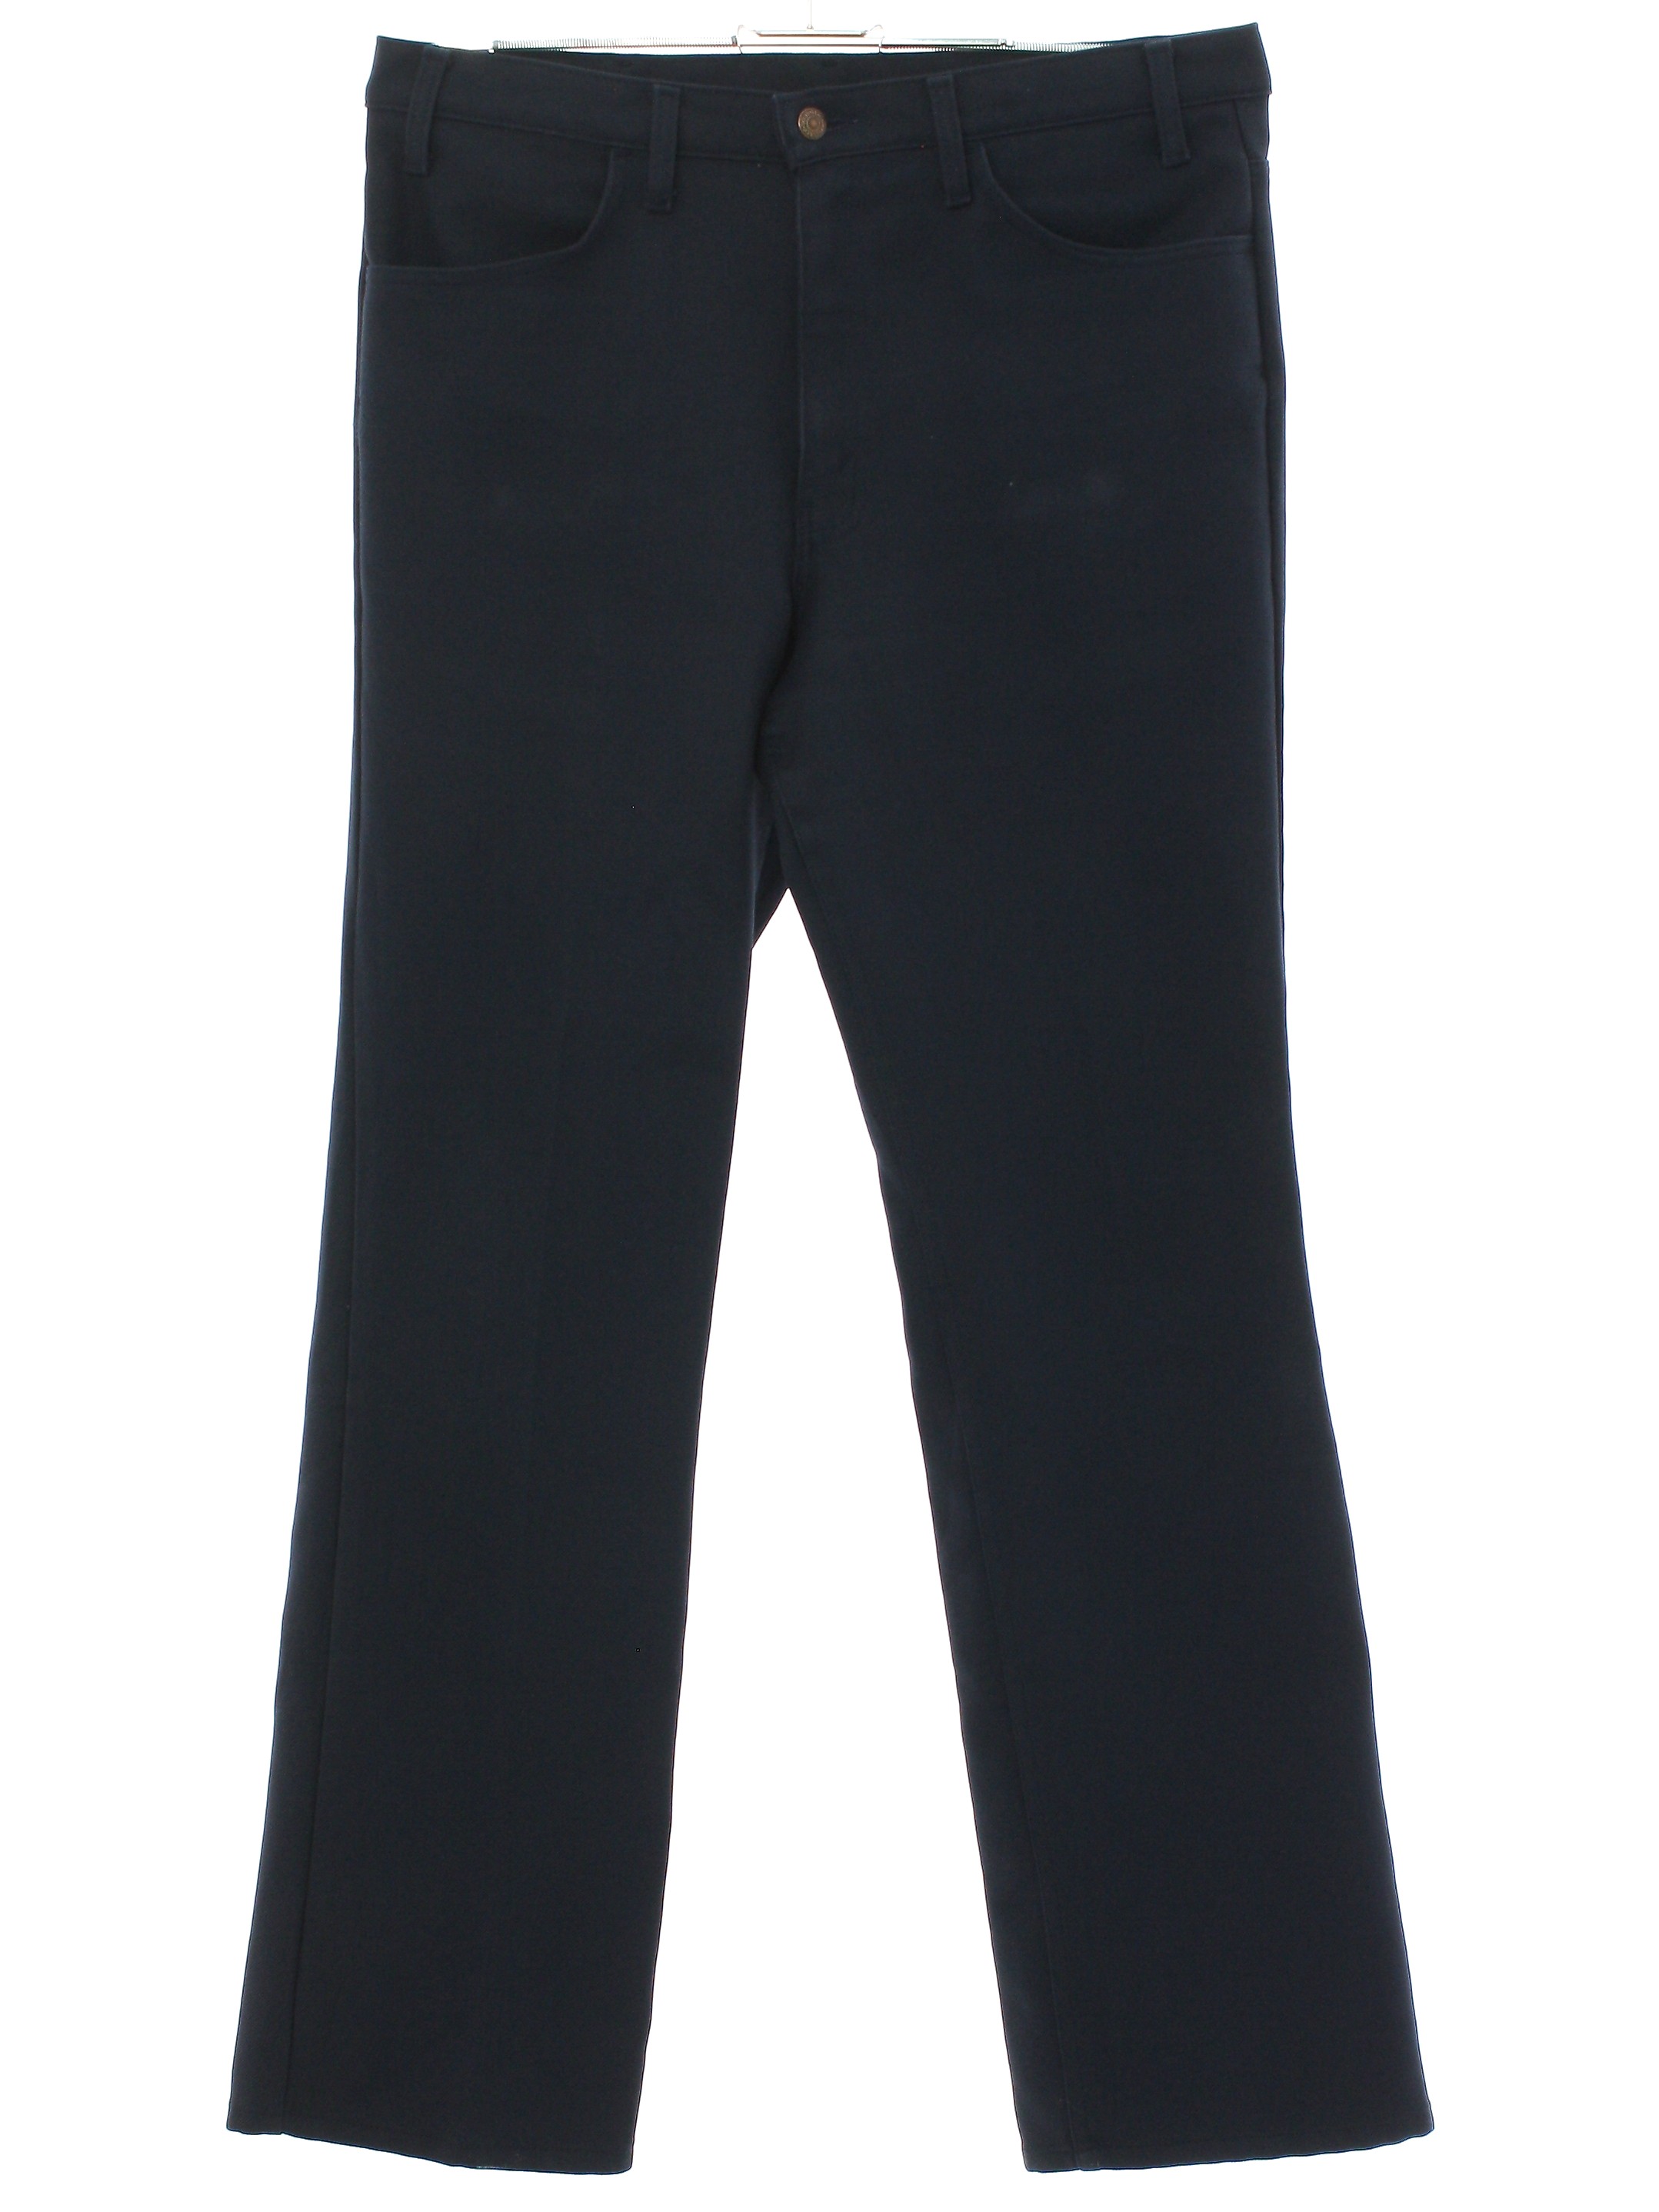 Retro Eighties Flared Pants / Flares: Early 80s -Levis 517- Mens ...